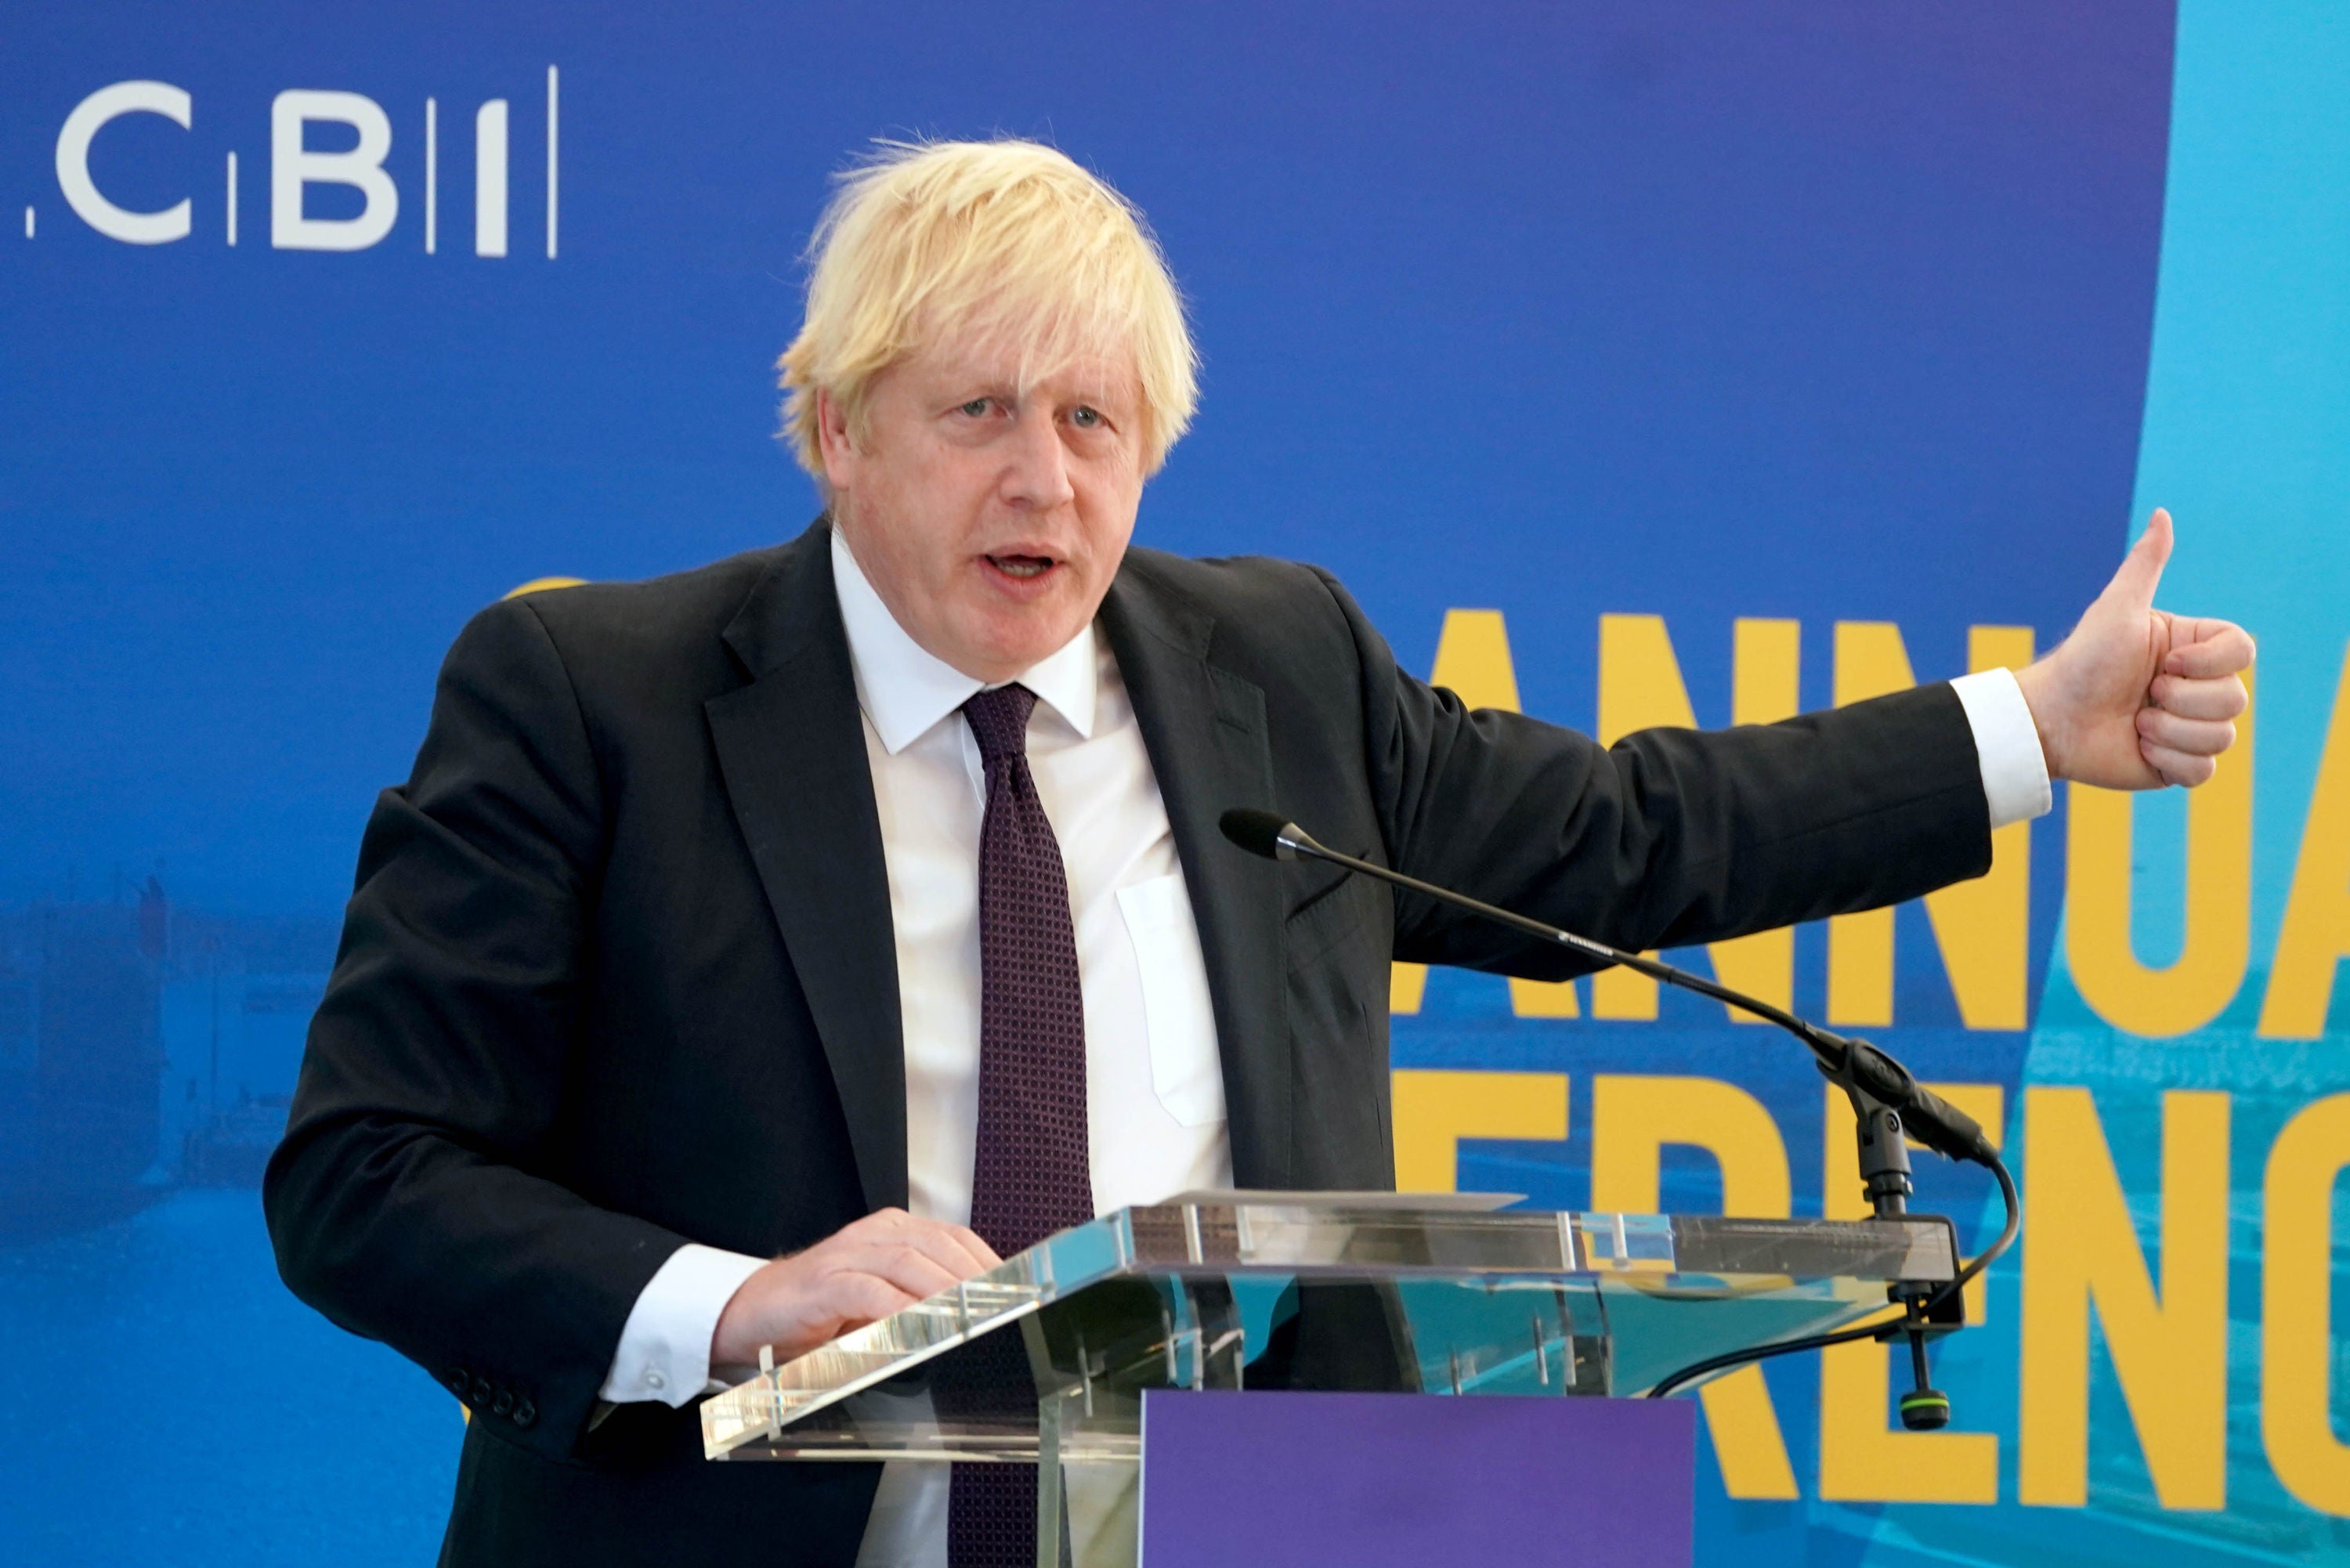 Prime Minister Boris Johnson speaking during the CBI annual conference, at the Port of Tyne, in South Shields.